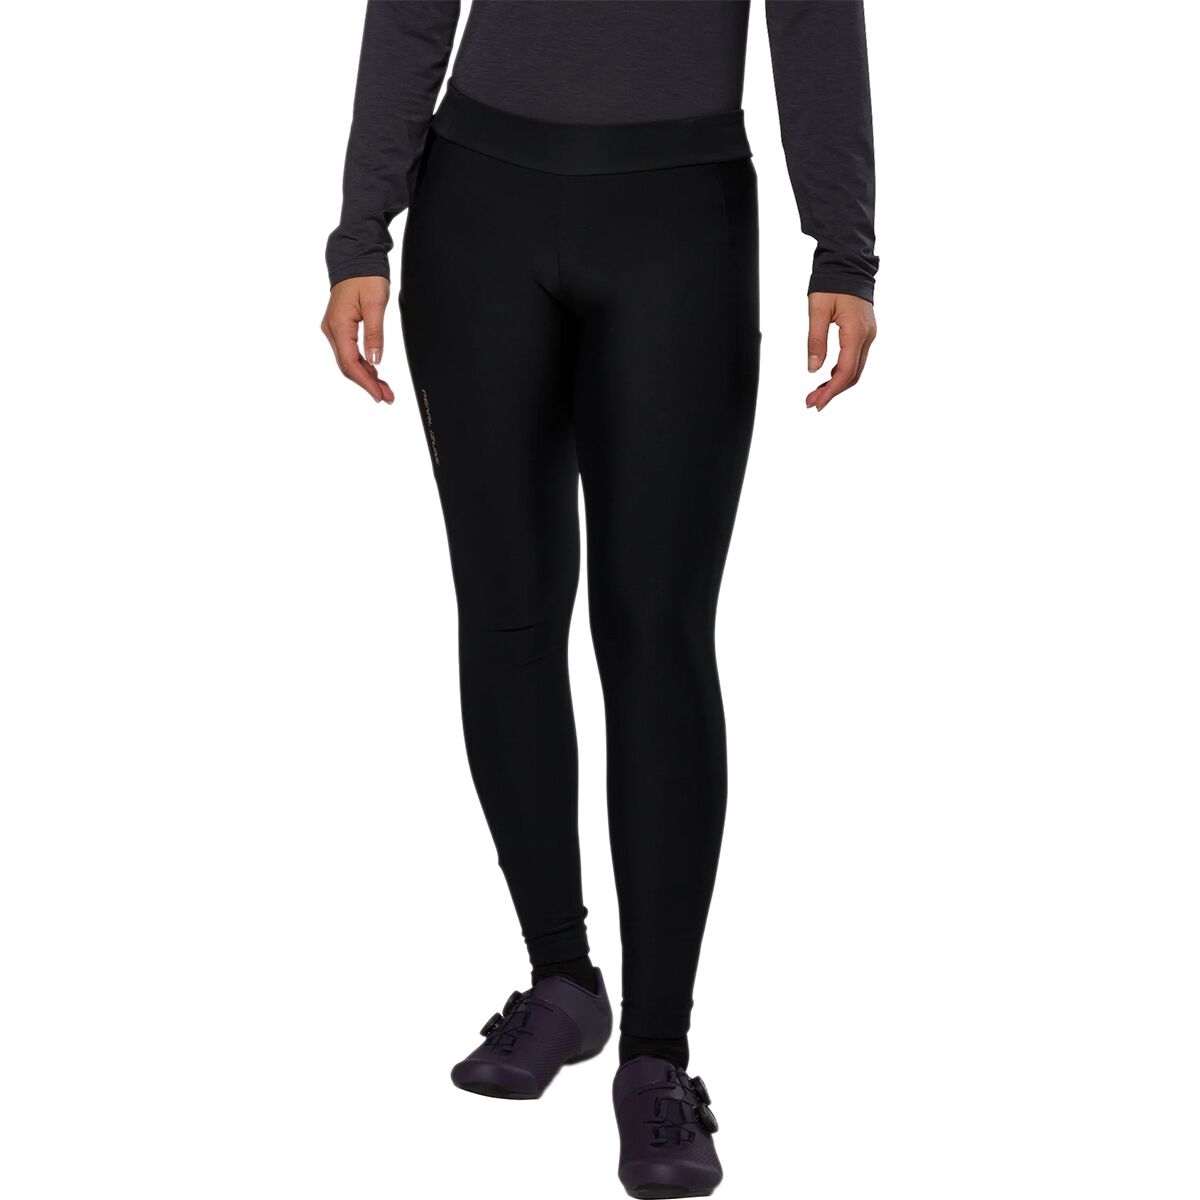 PEARL iZUMi Quest Thermal Cycling Tight - Women's